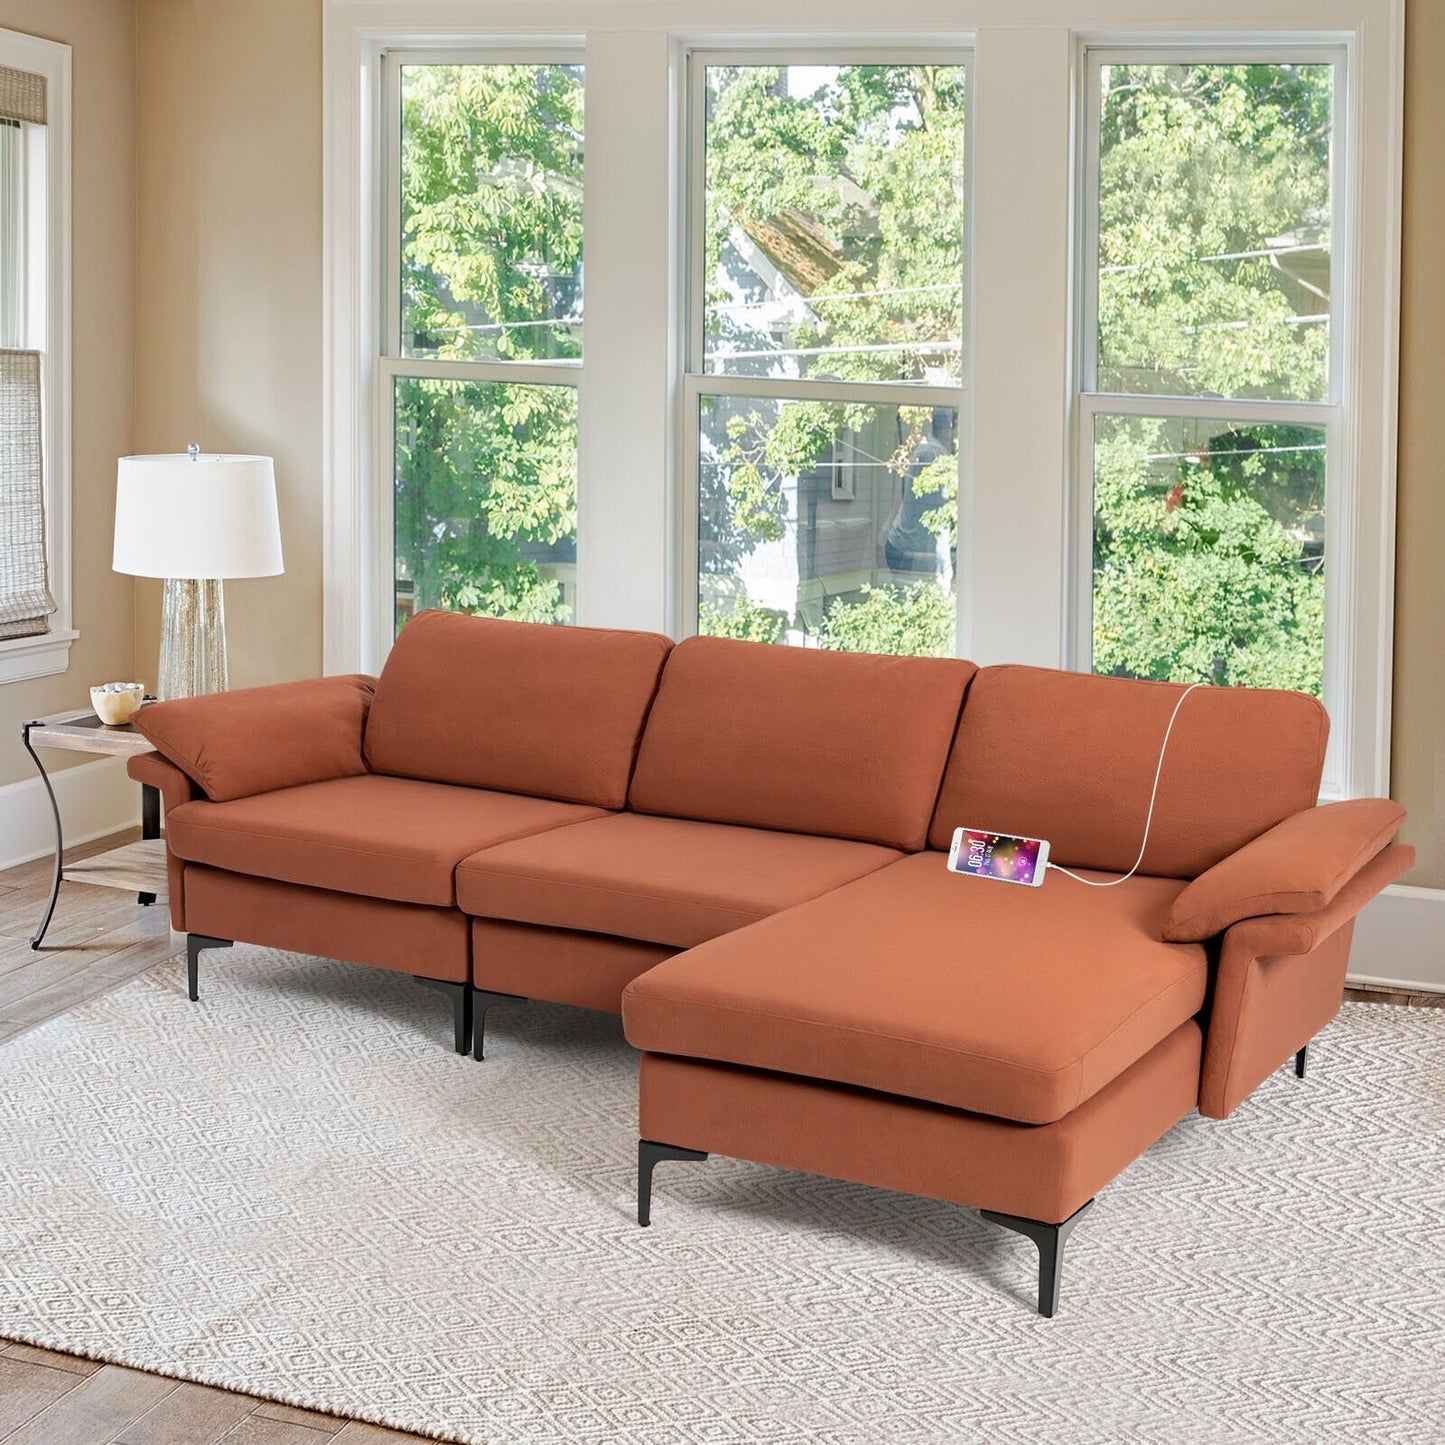 Extra Large Modular L-shaped Sectional Sofa with Reversible Chaise for 4-5 People-Rust Red, Red